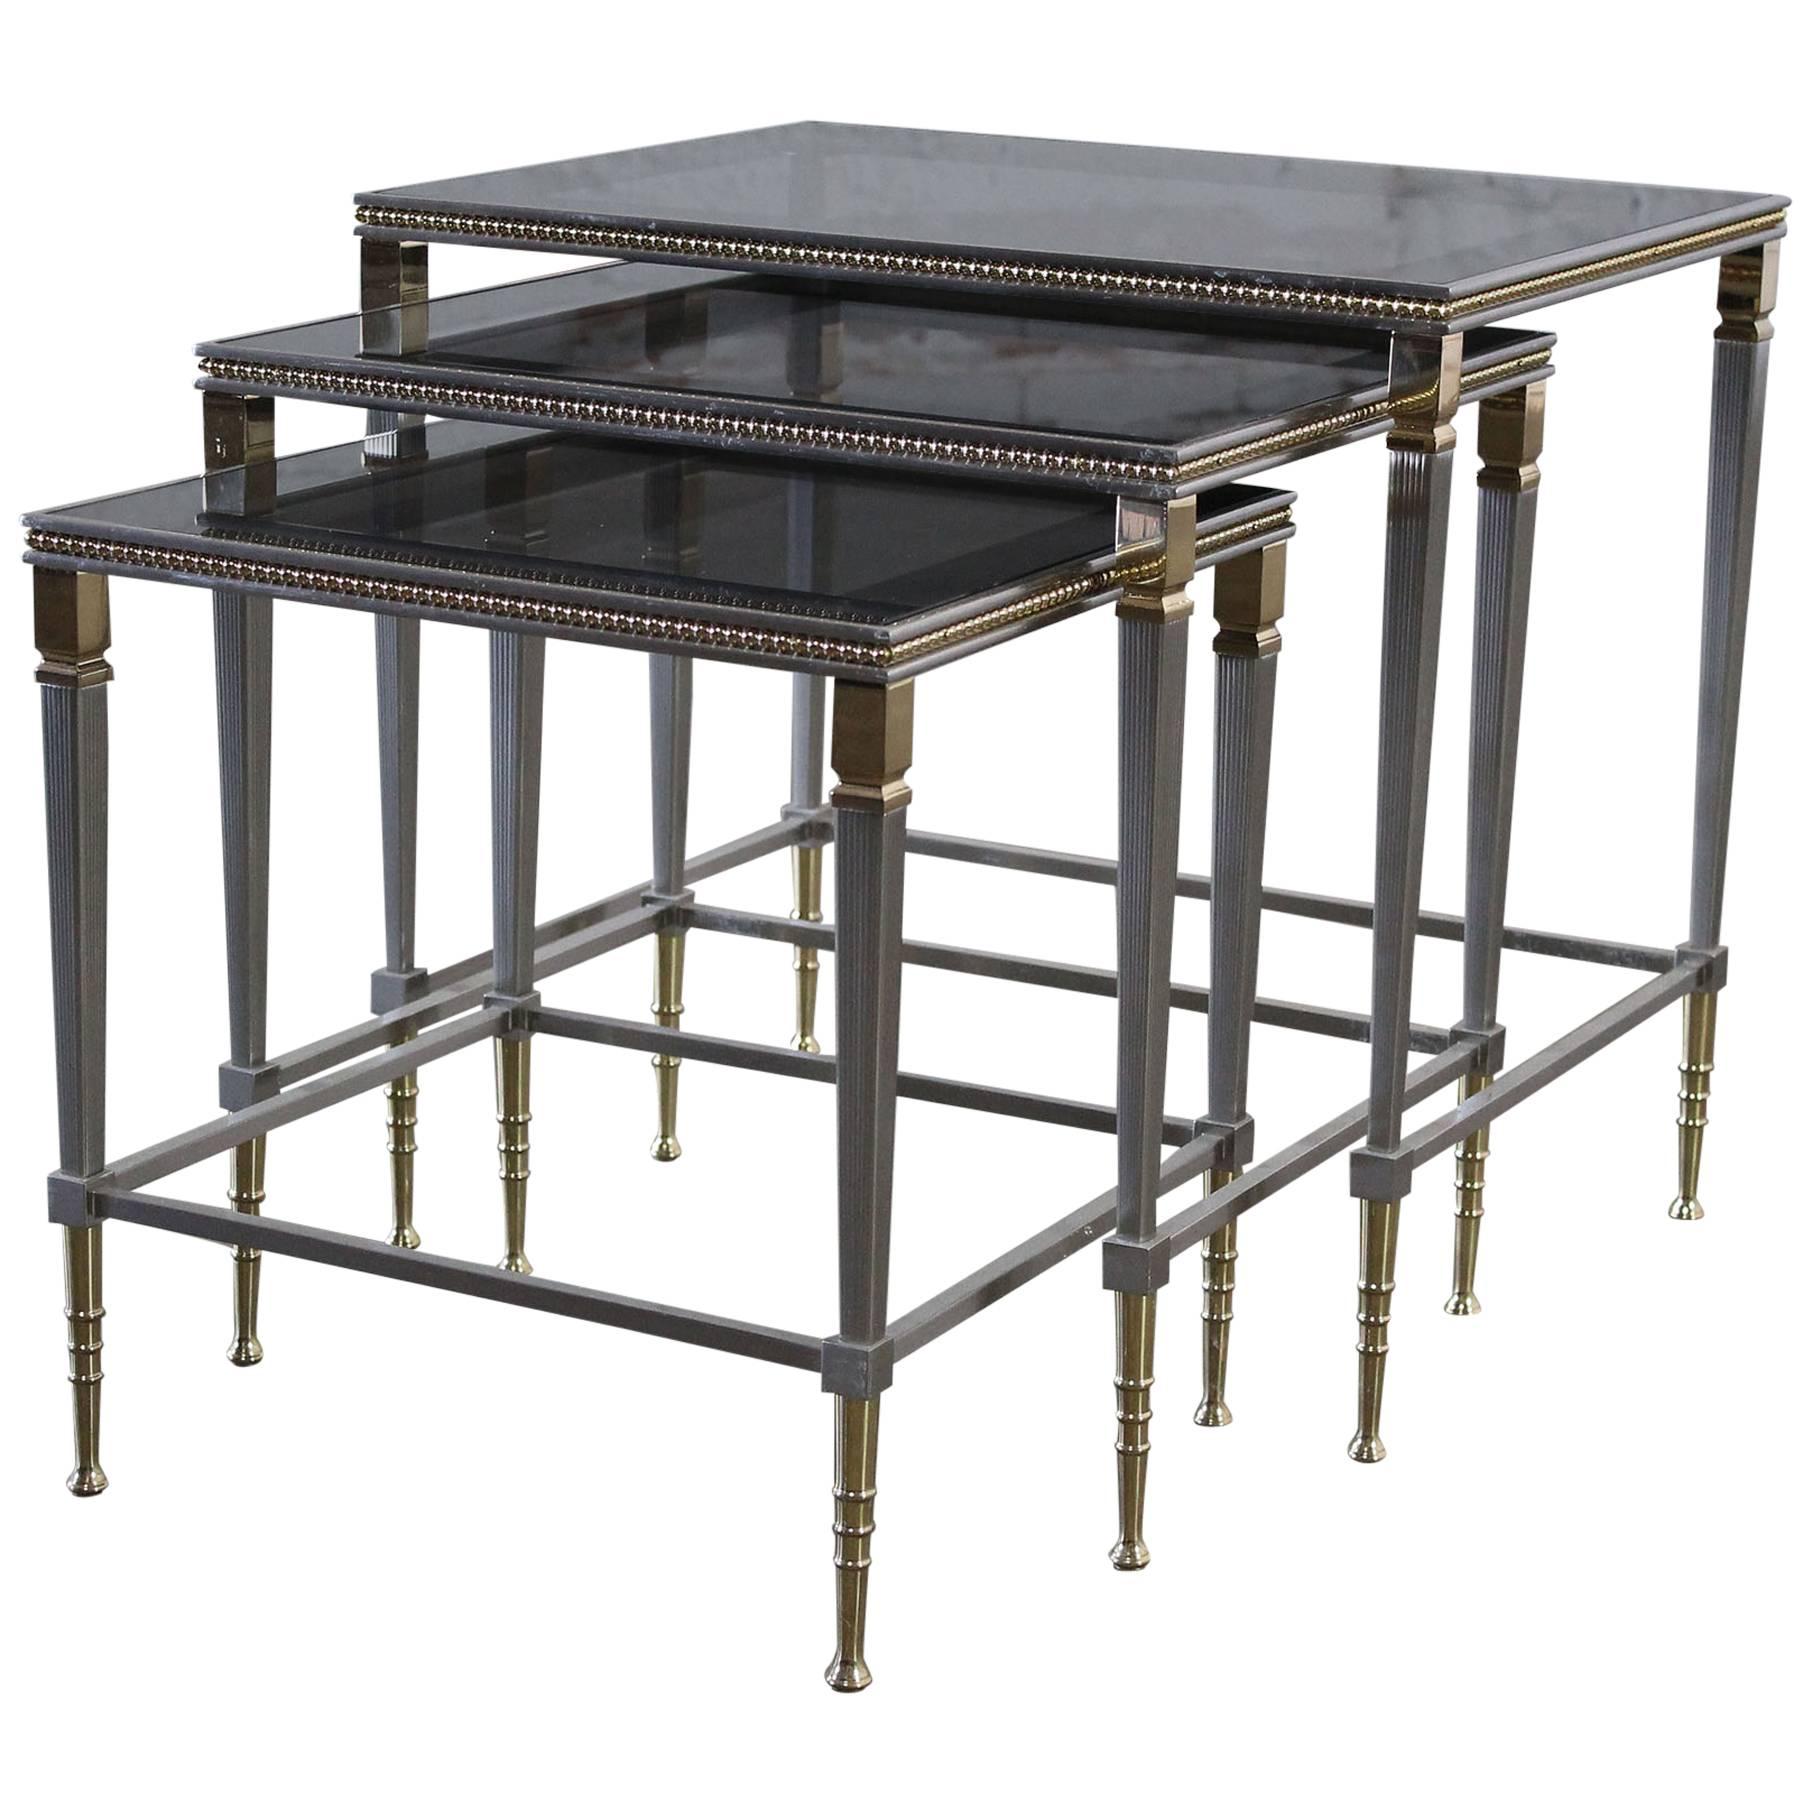 Brass and Stainless Nesting Tables with Mirror Edged Glass Tops